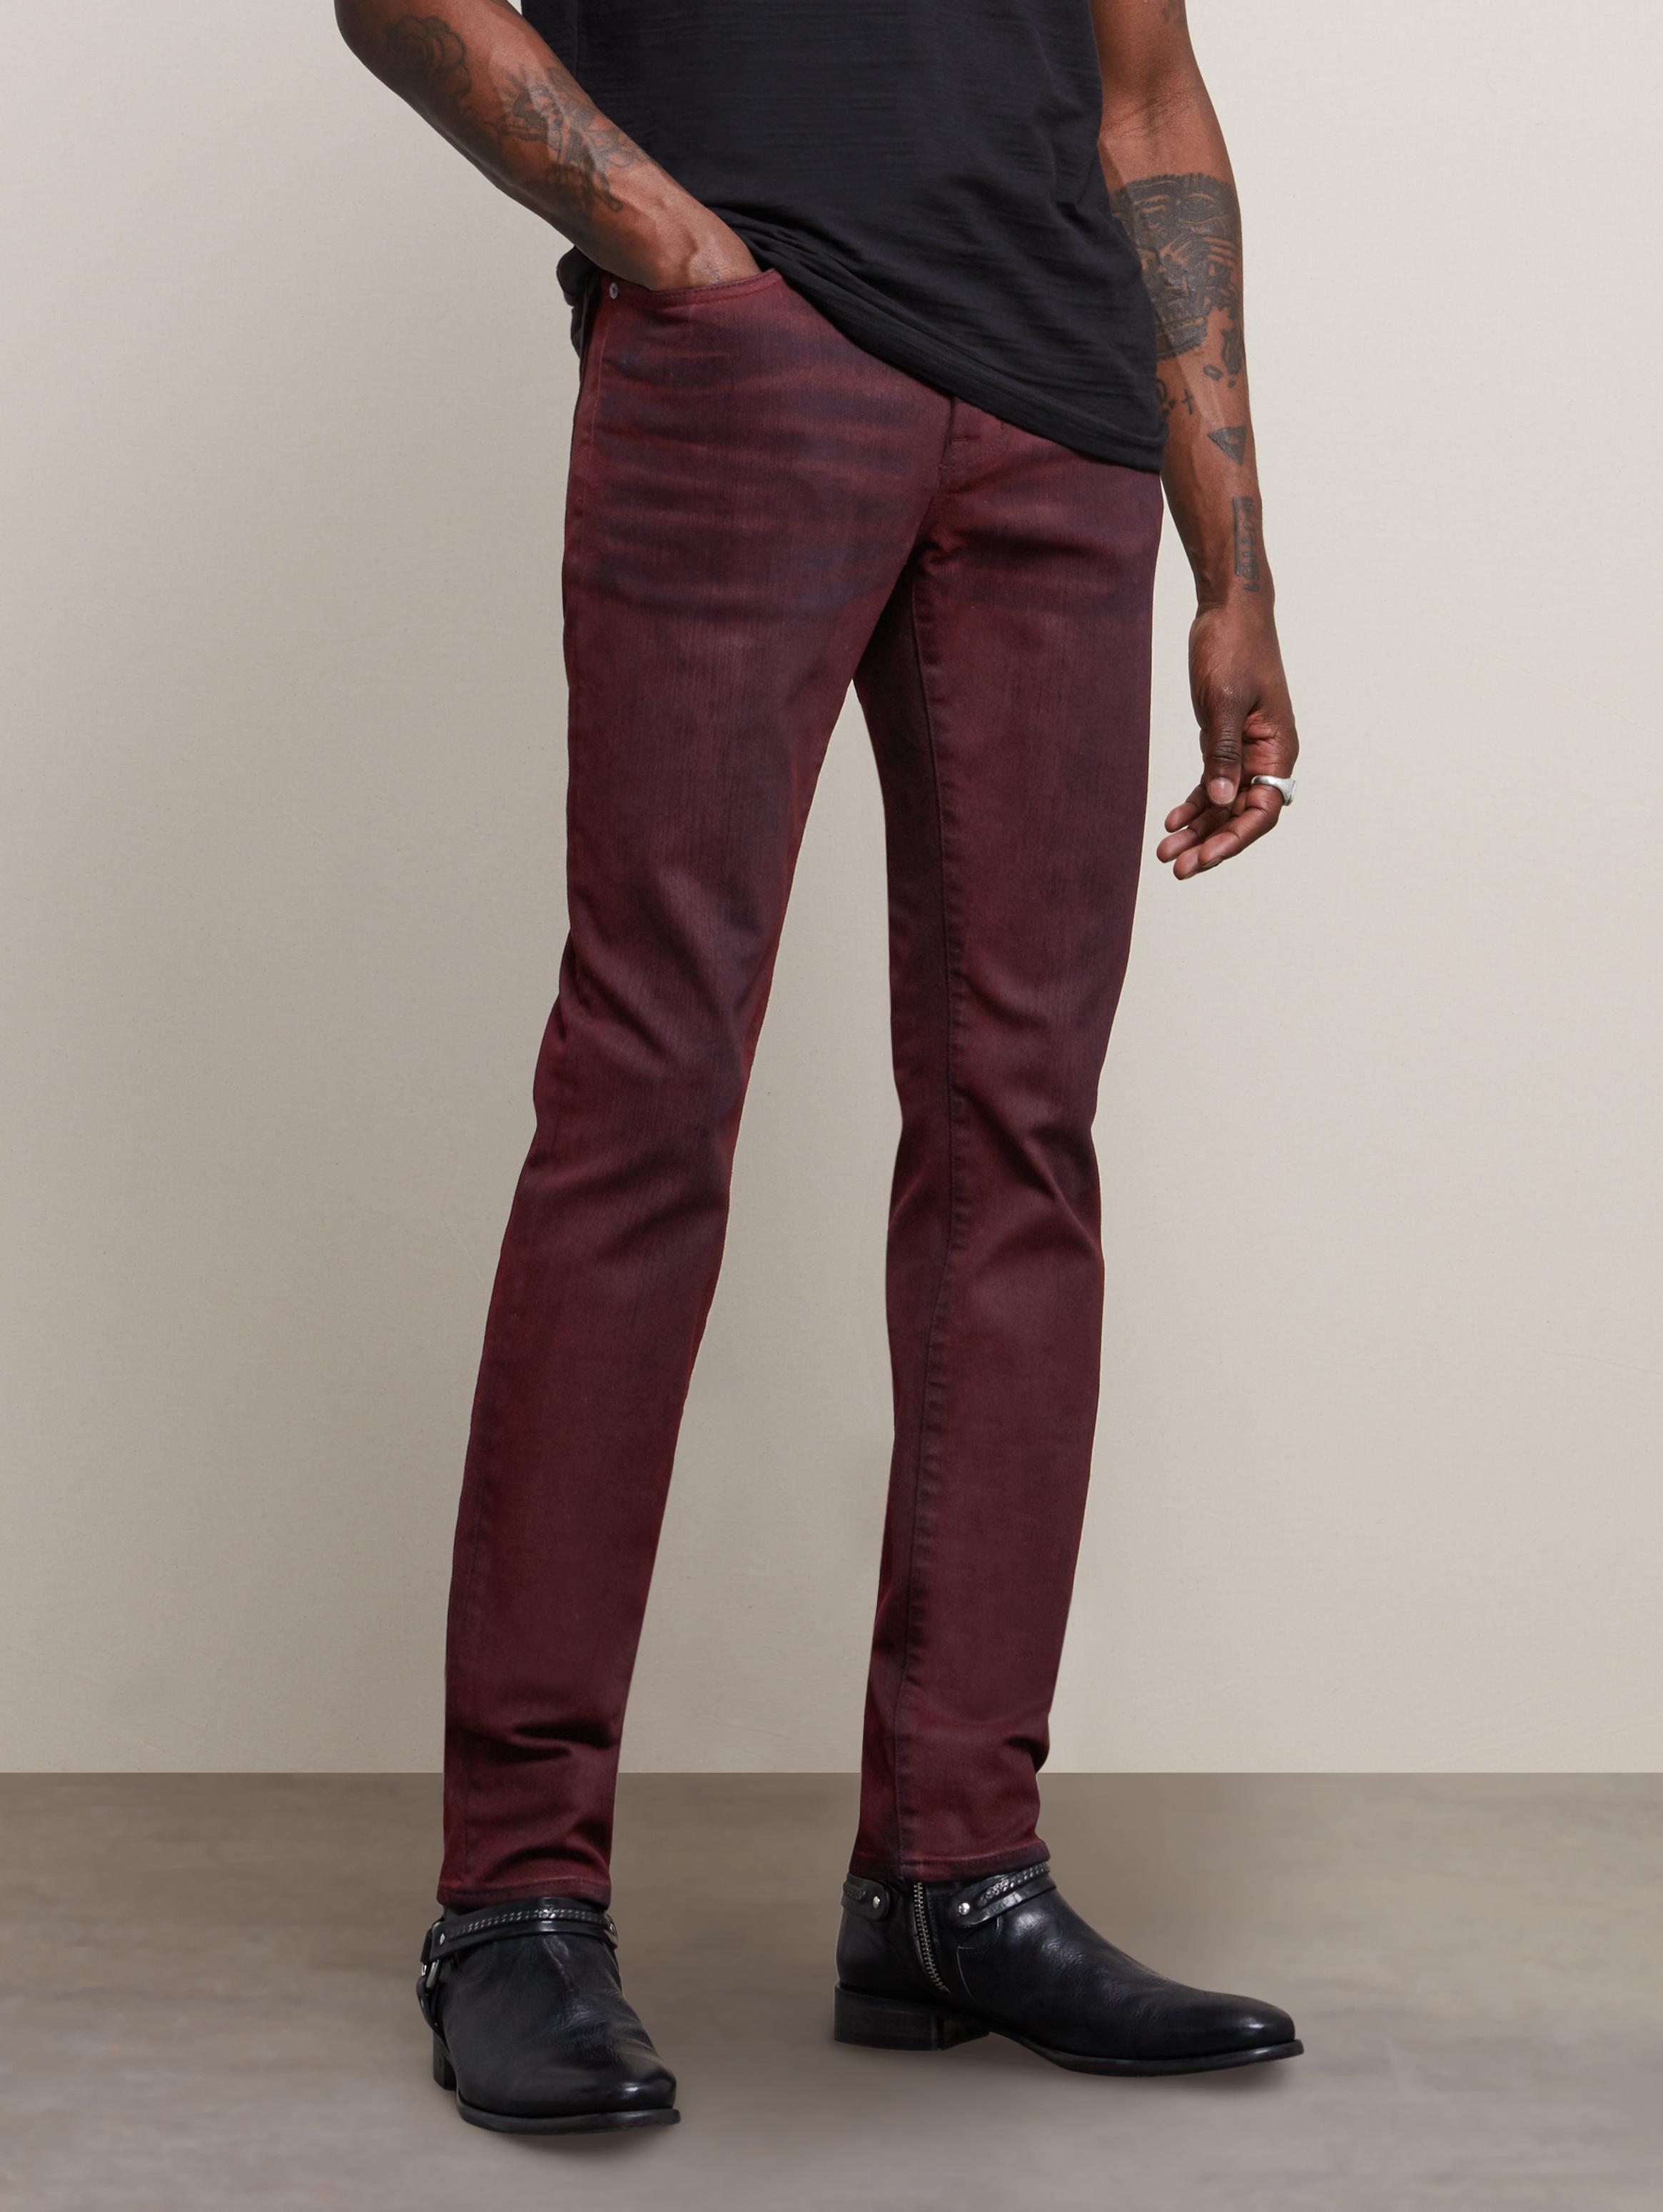 WIGHT SKINNY STRAIGHT FIT JEAN - GREGORY WASH image number 2